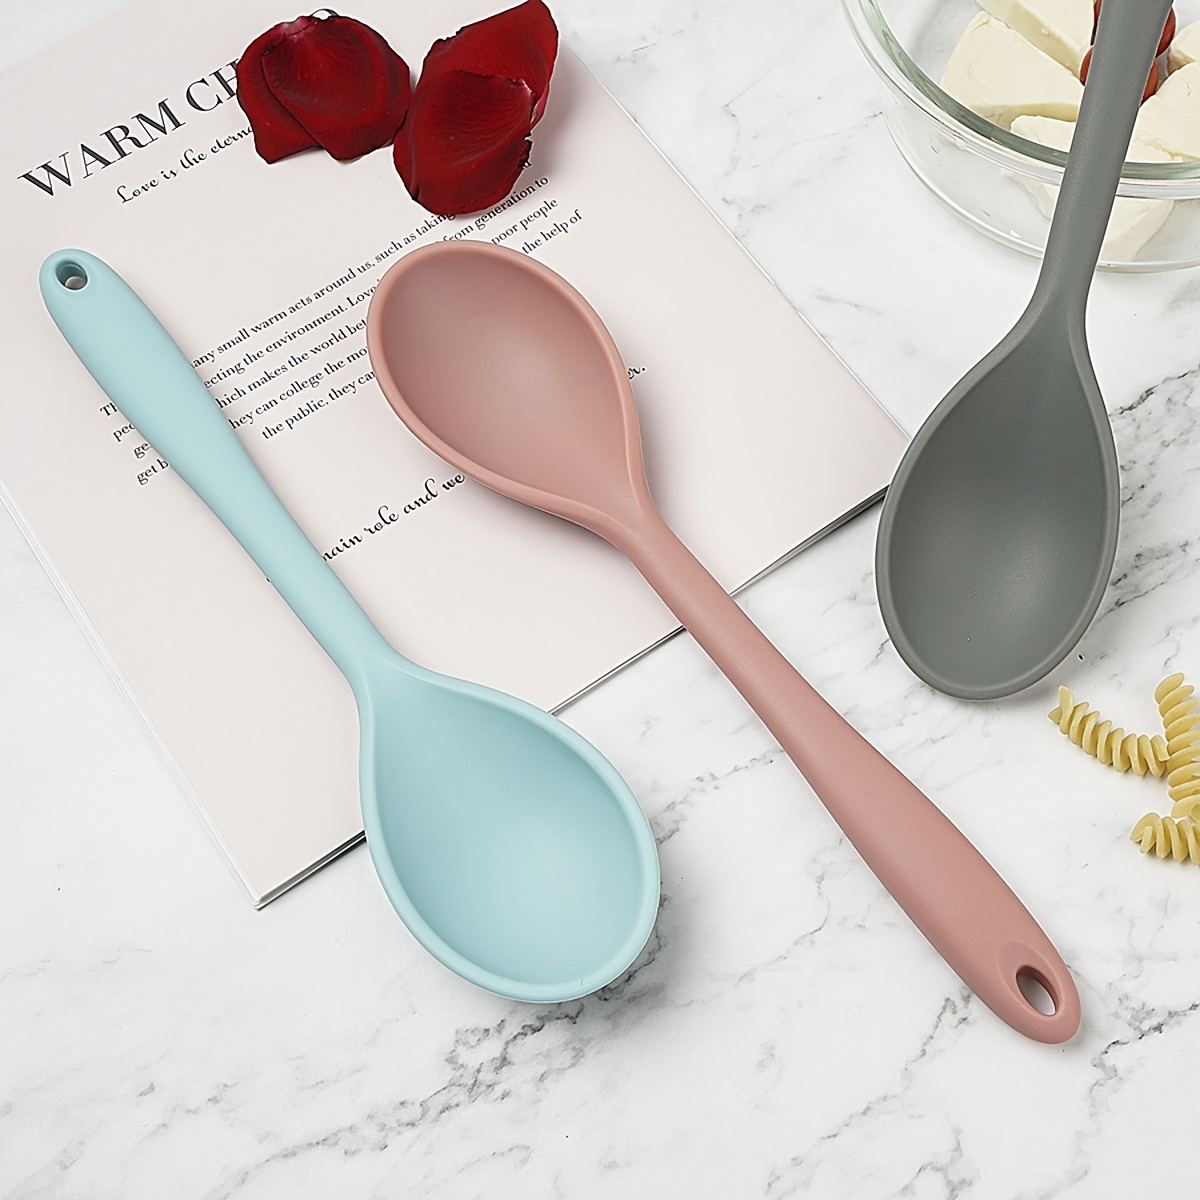 4 Pieces Silicone Slotted Spoons Silicone Nonstick Mixing Spoon Heat  Resistant for Baking, Serving and Stirring